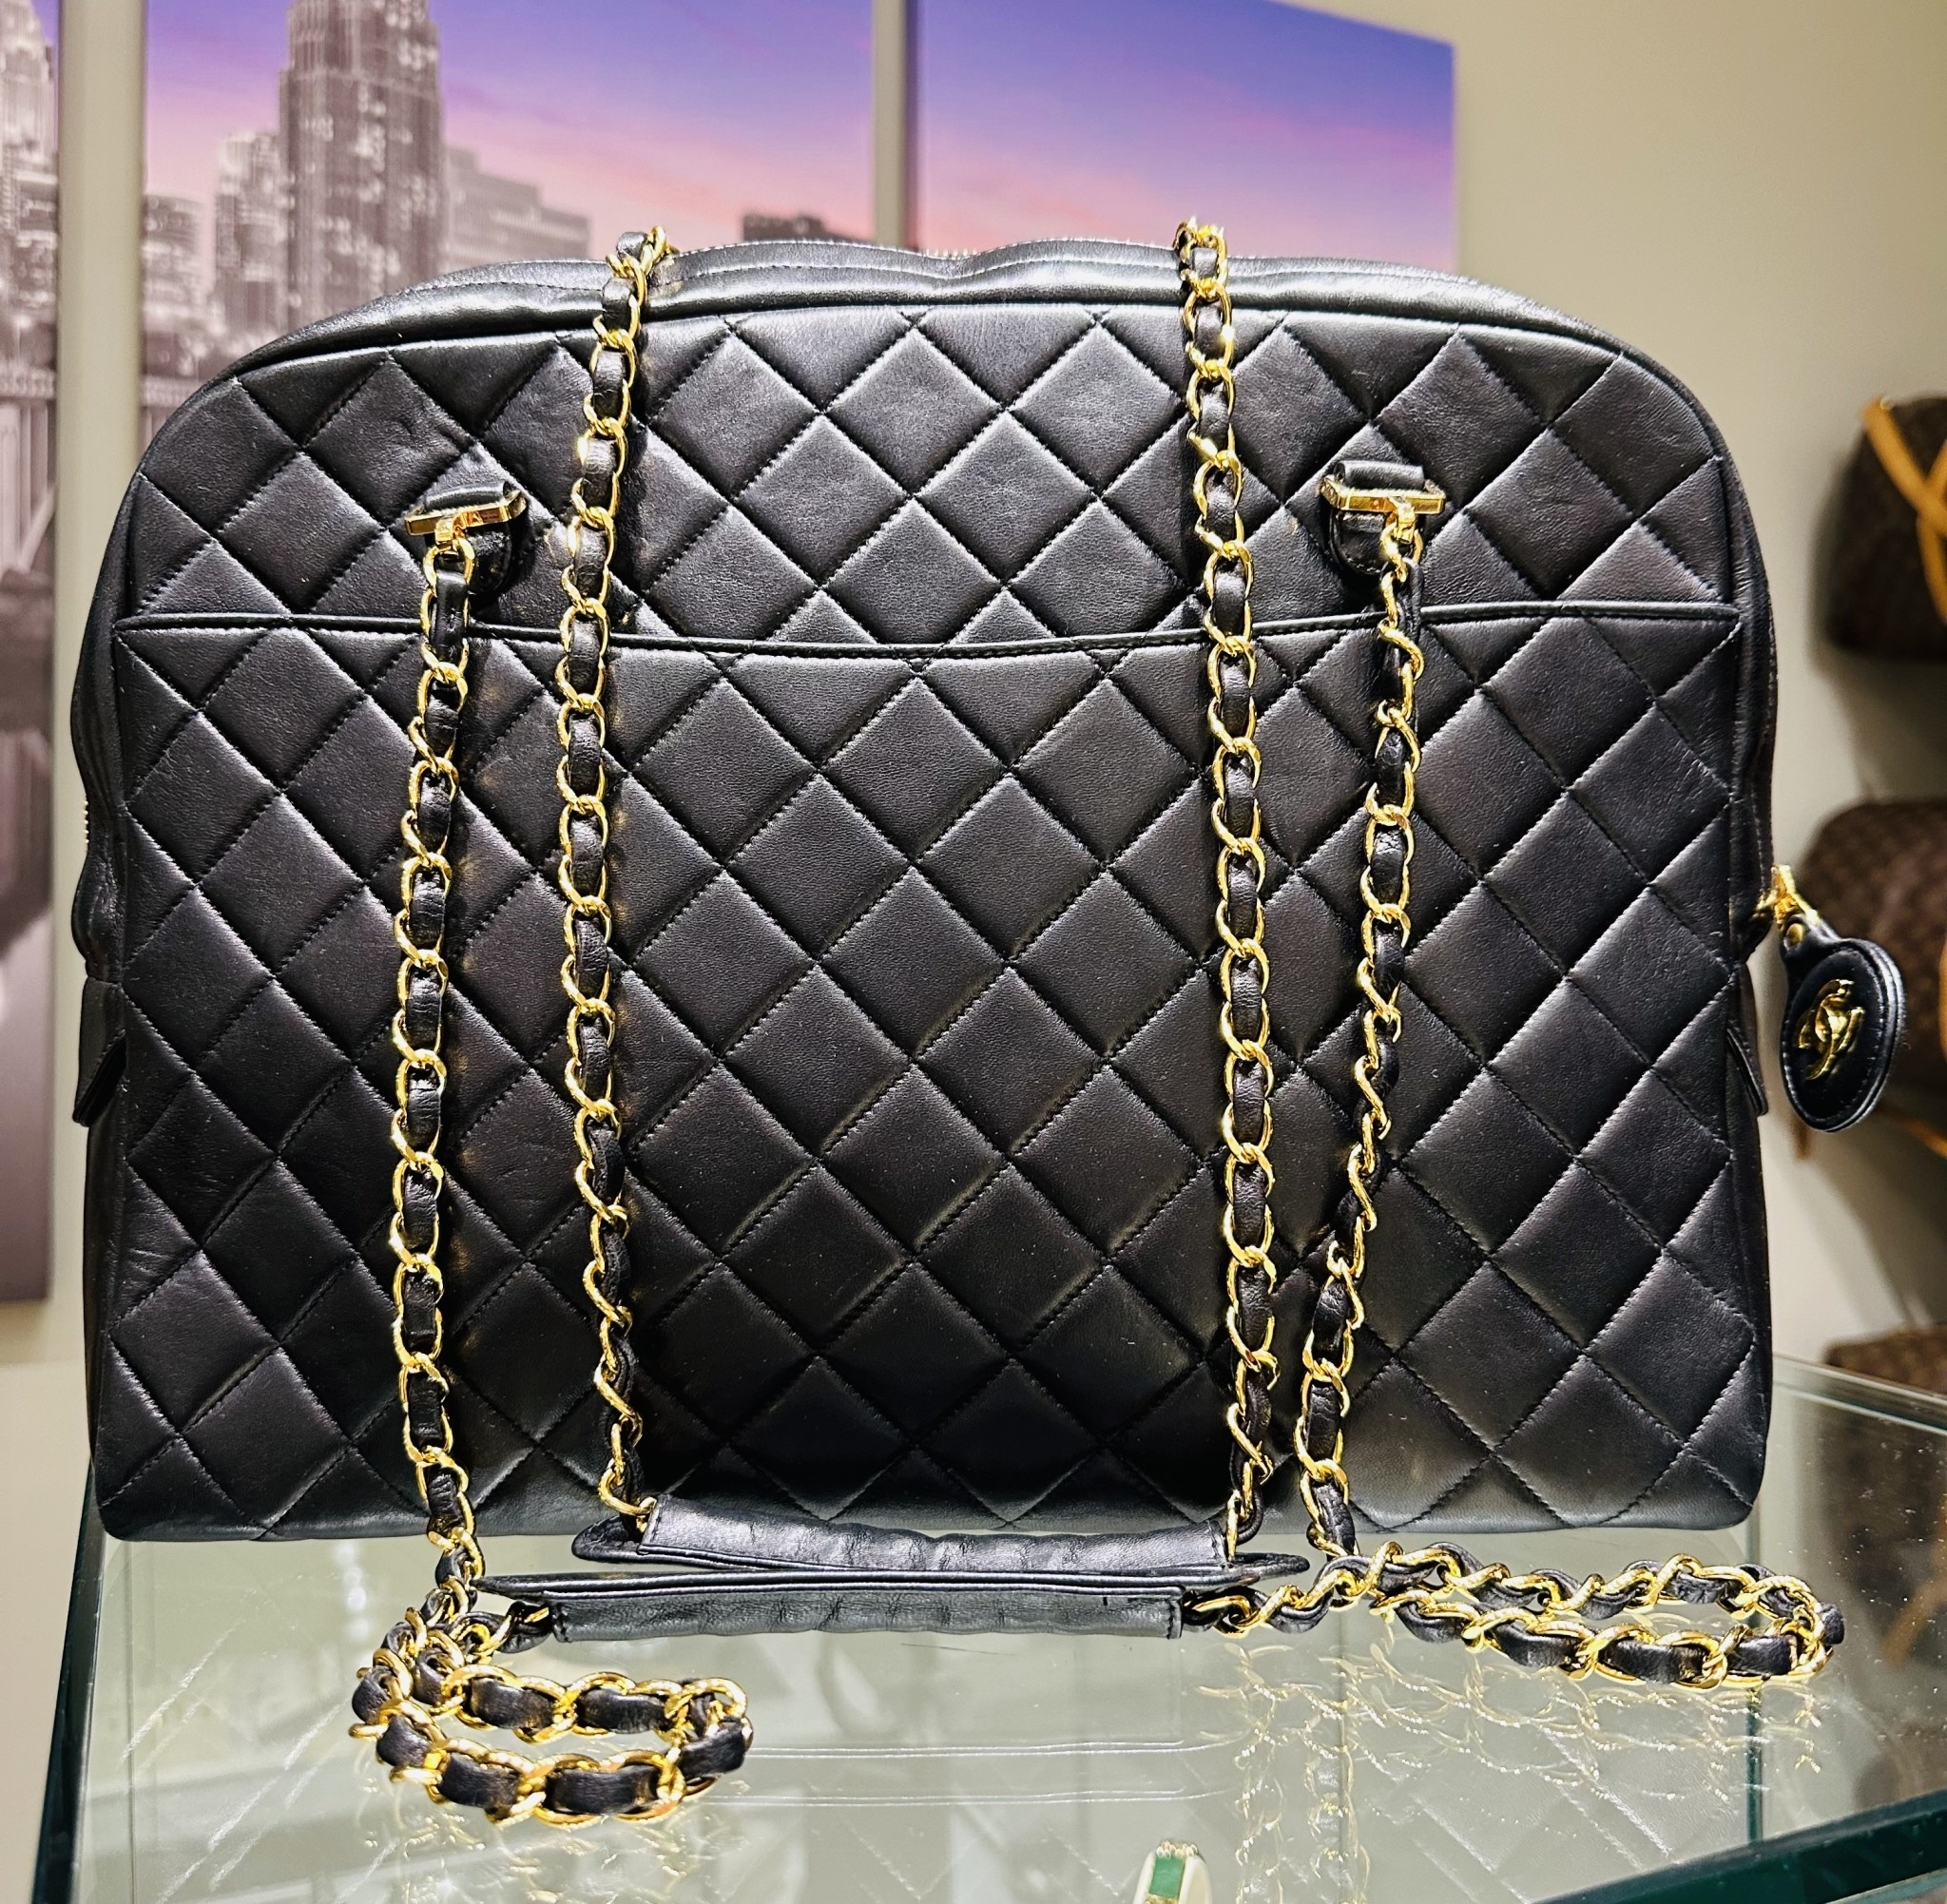 Handbag Chanel Vintage Quilted Lambskin Gold Chain 123020022 - Heritage  Estate Jewelry